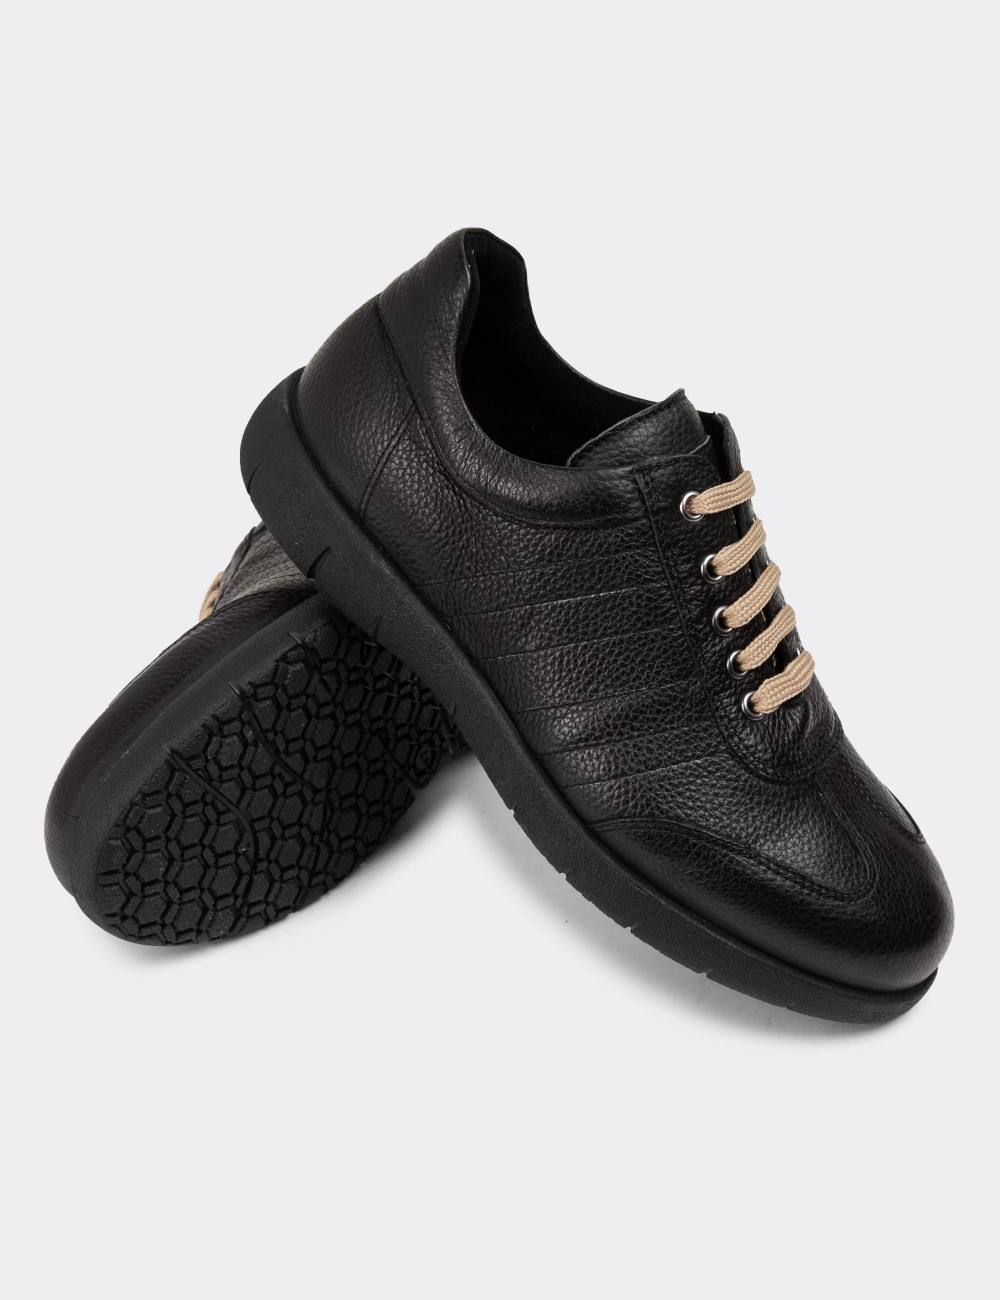 Black Leather Lace-up Shoes - 01950MSYHC01